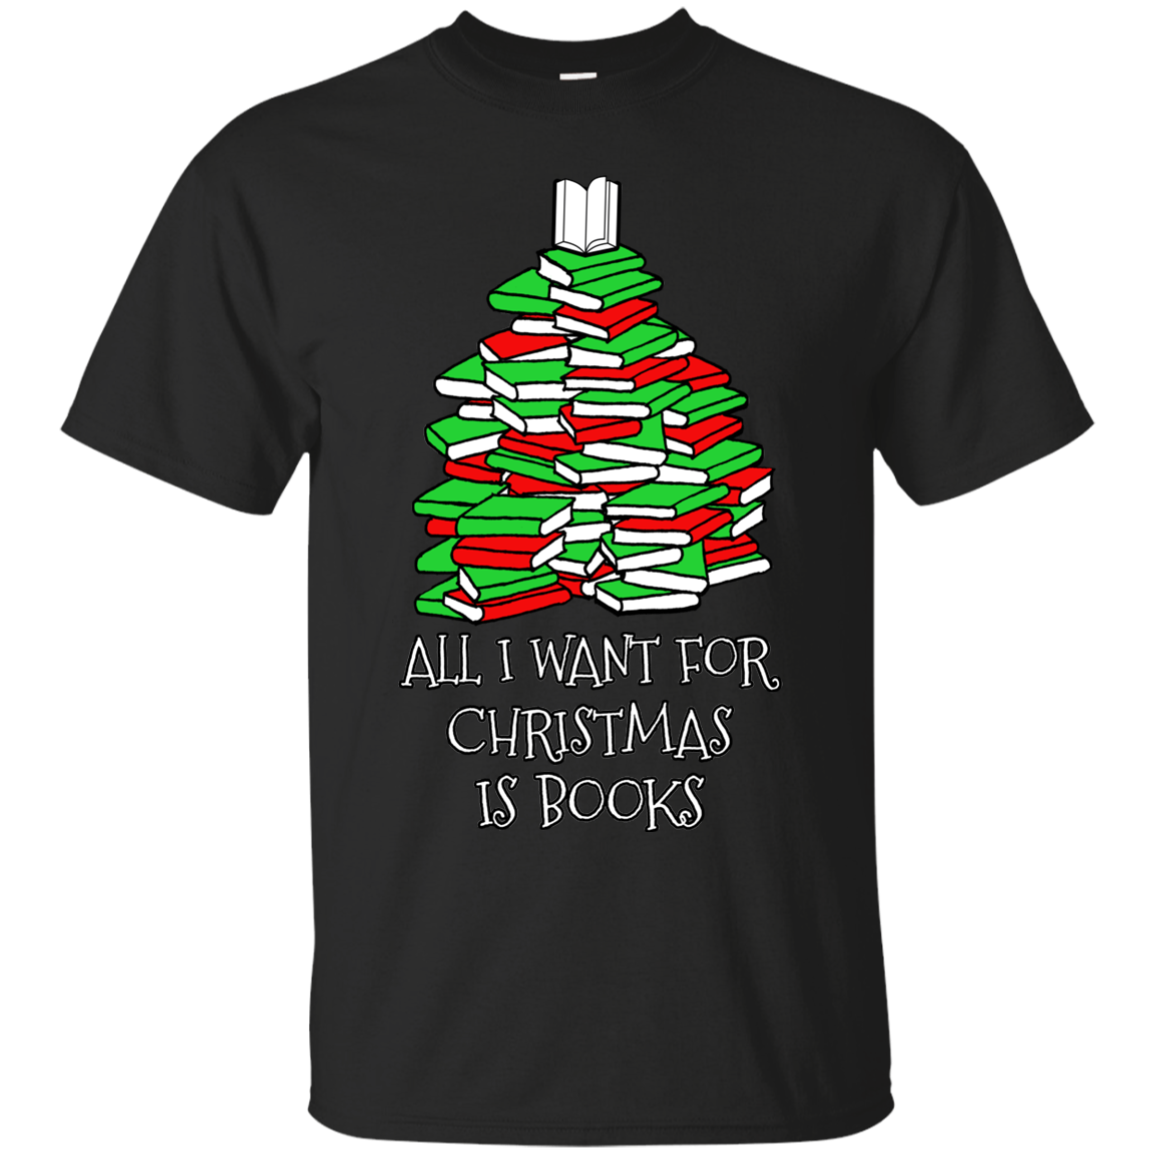 All I Want for Christmas is Books Ultra Cotton T-Shirt